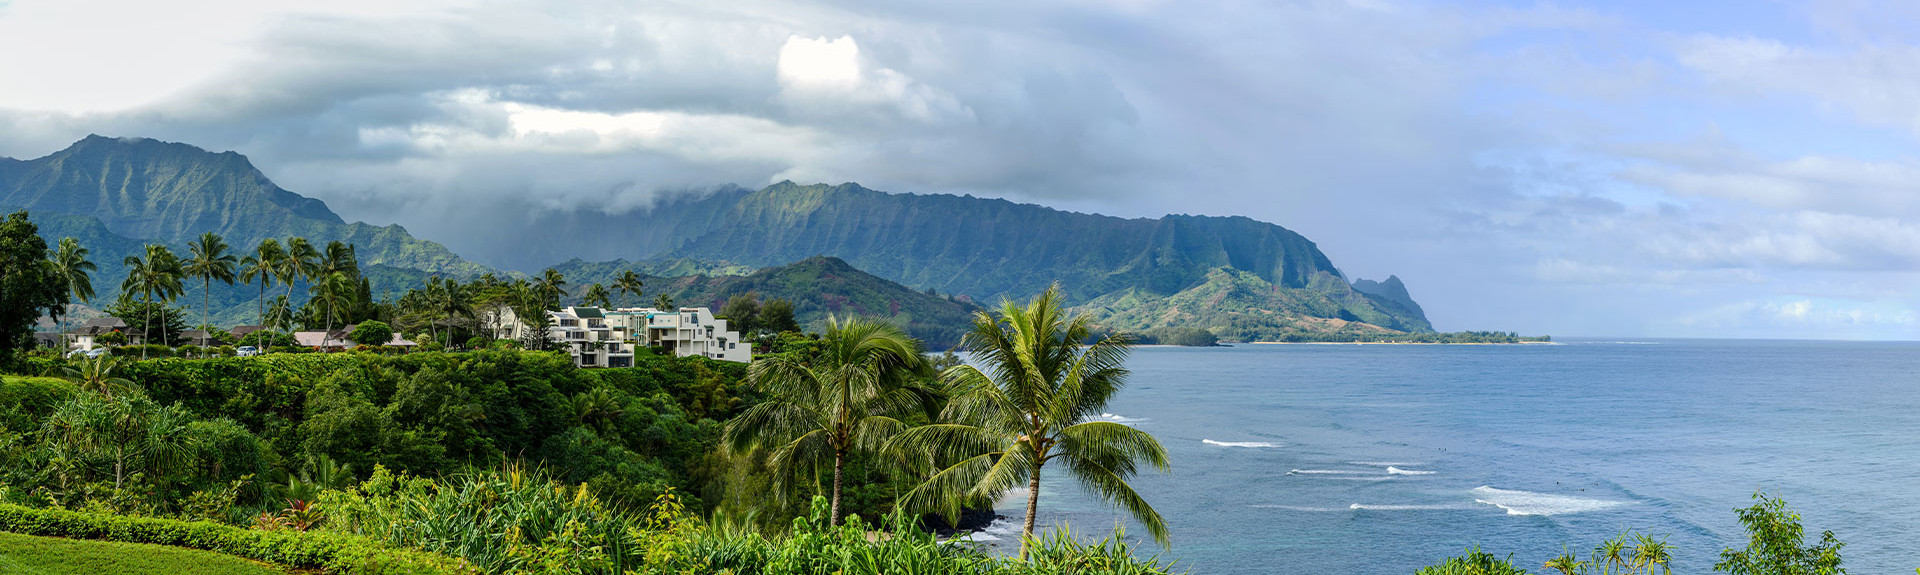 Kauai Accommodations, Lodging, & Places to Stay